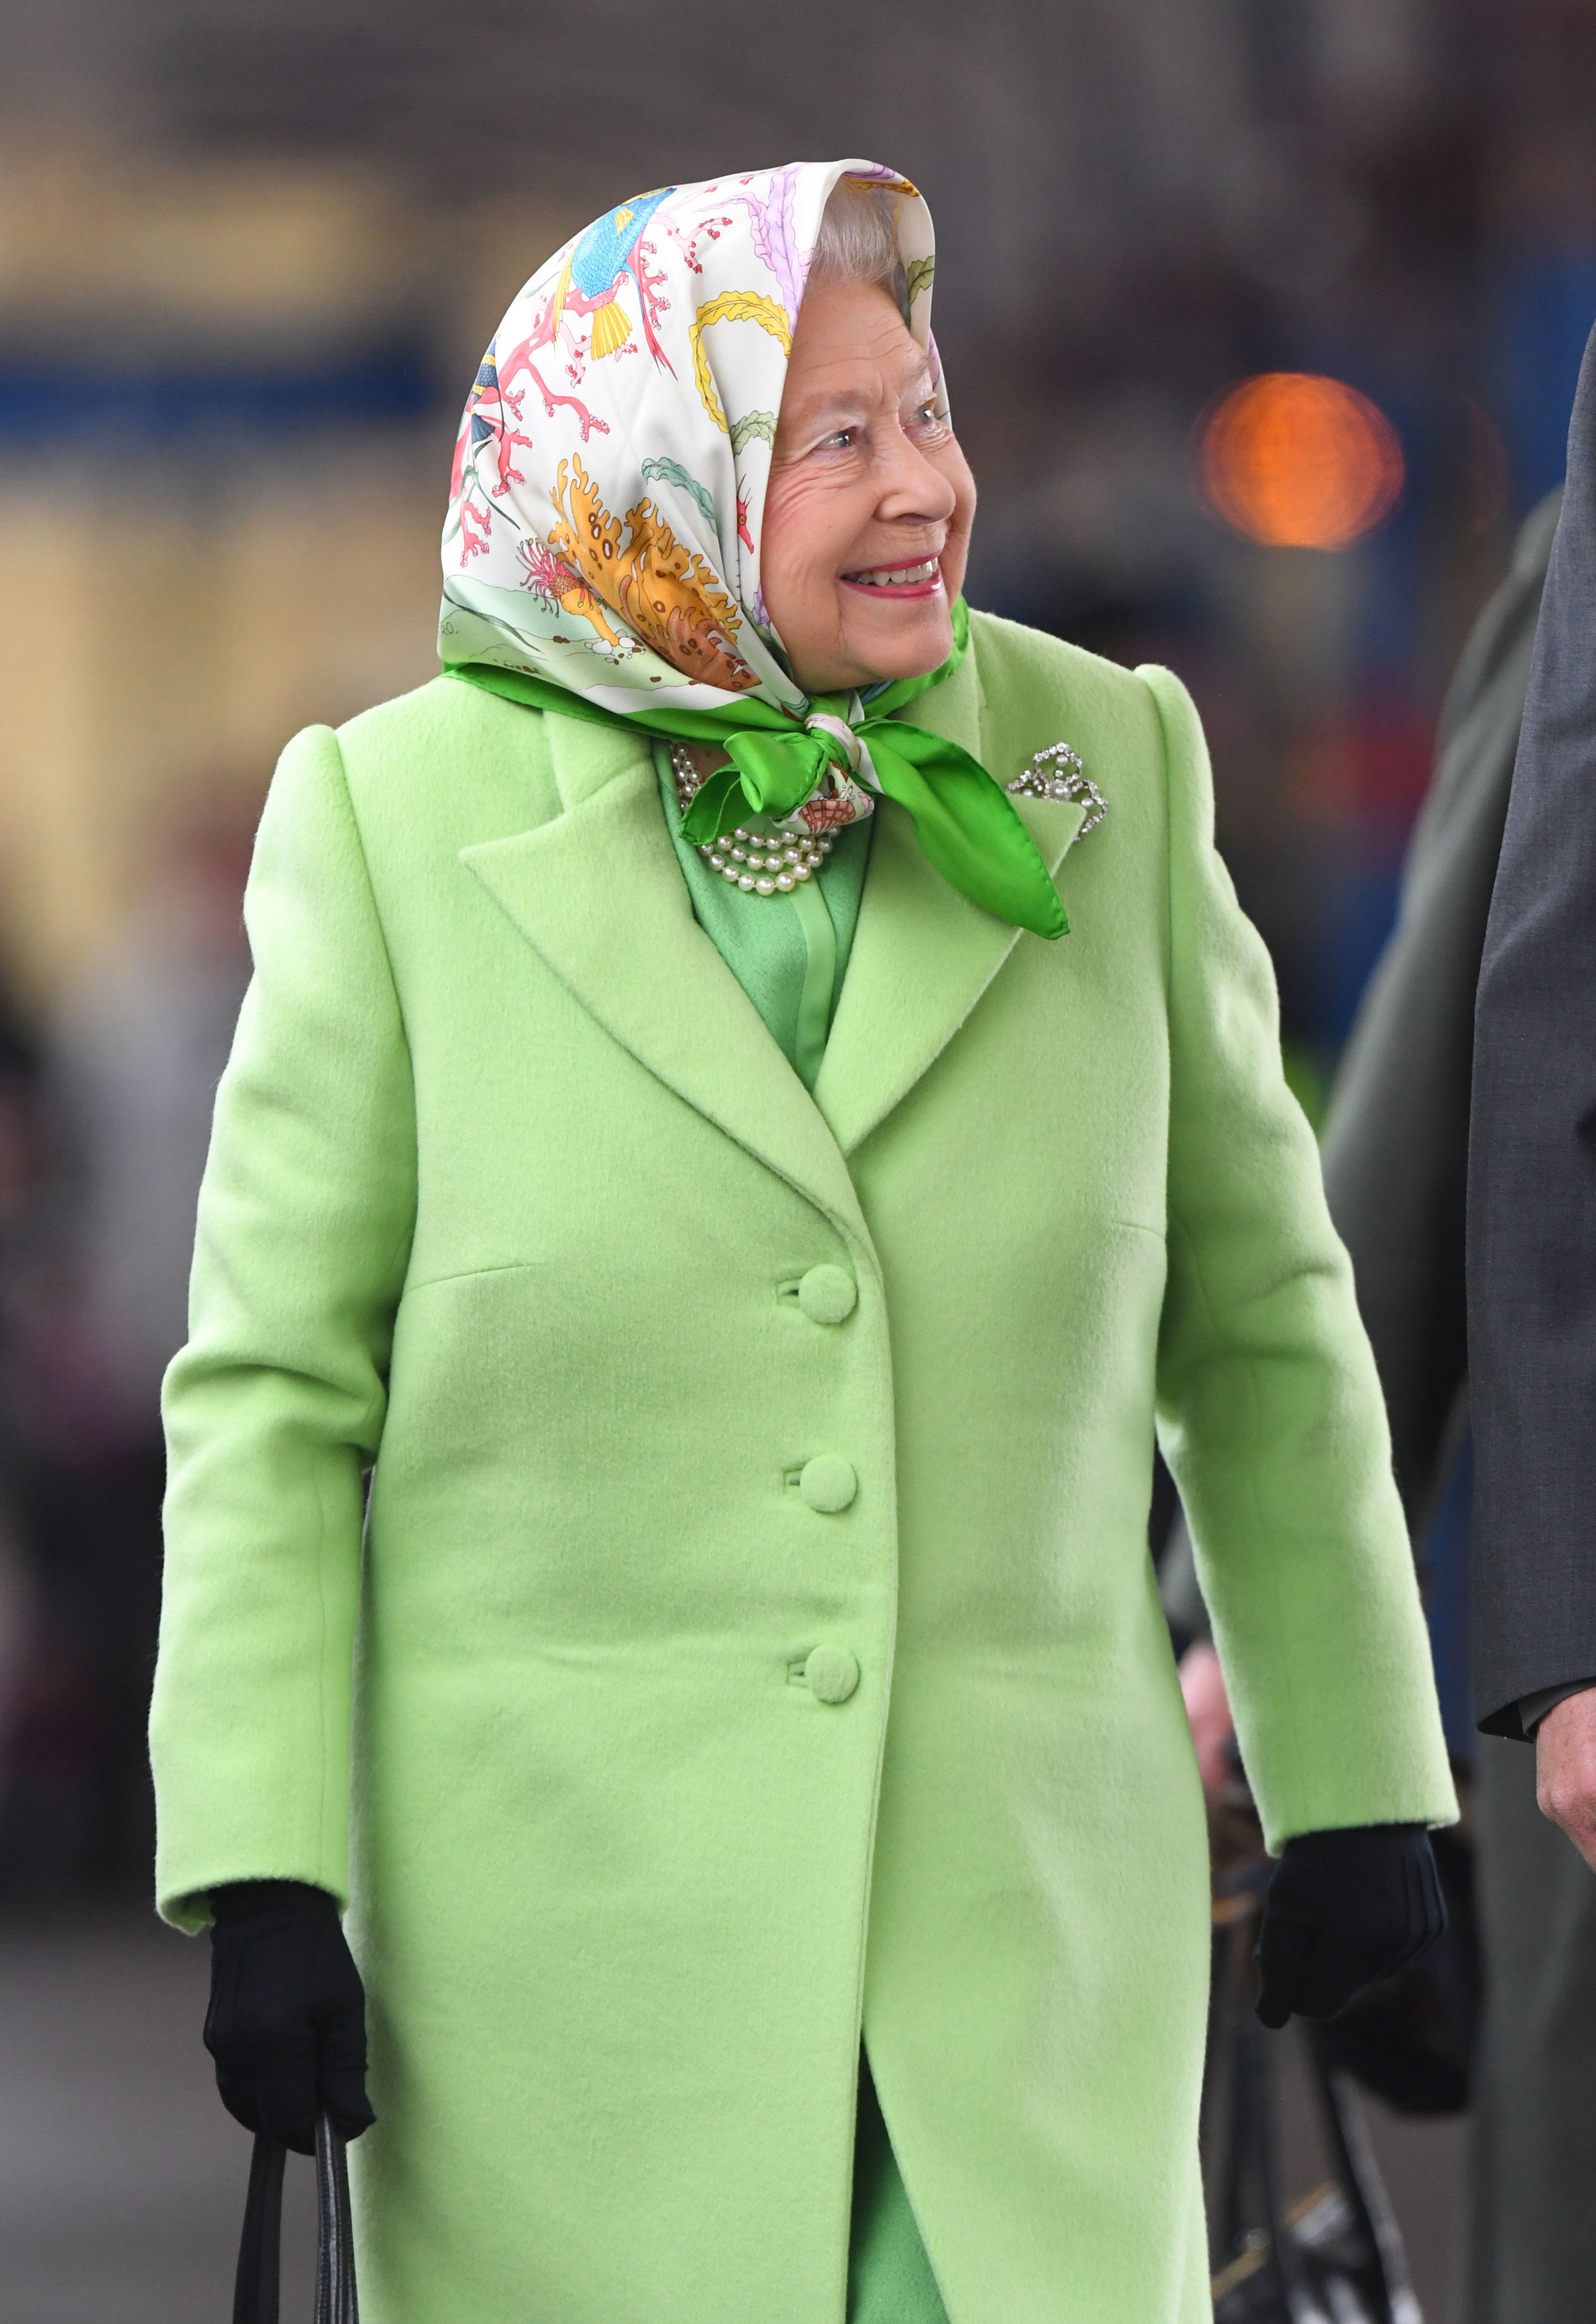 The Queen at King's Lynn railway station